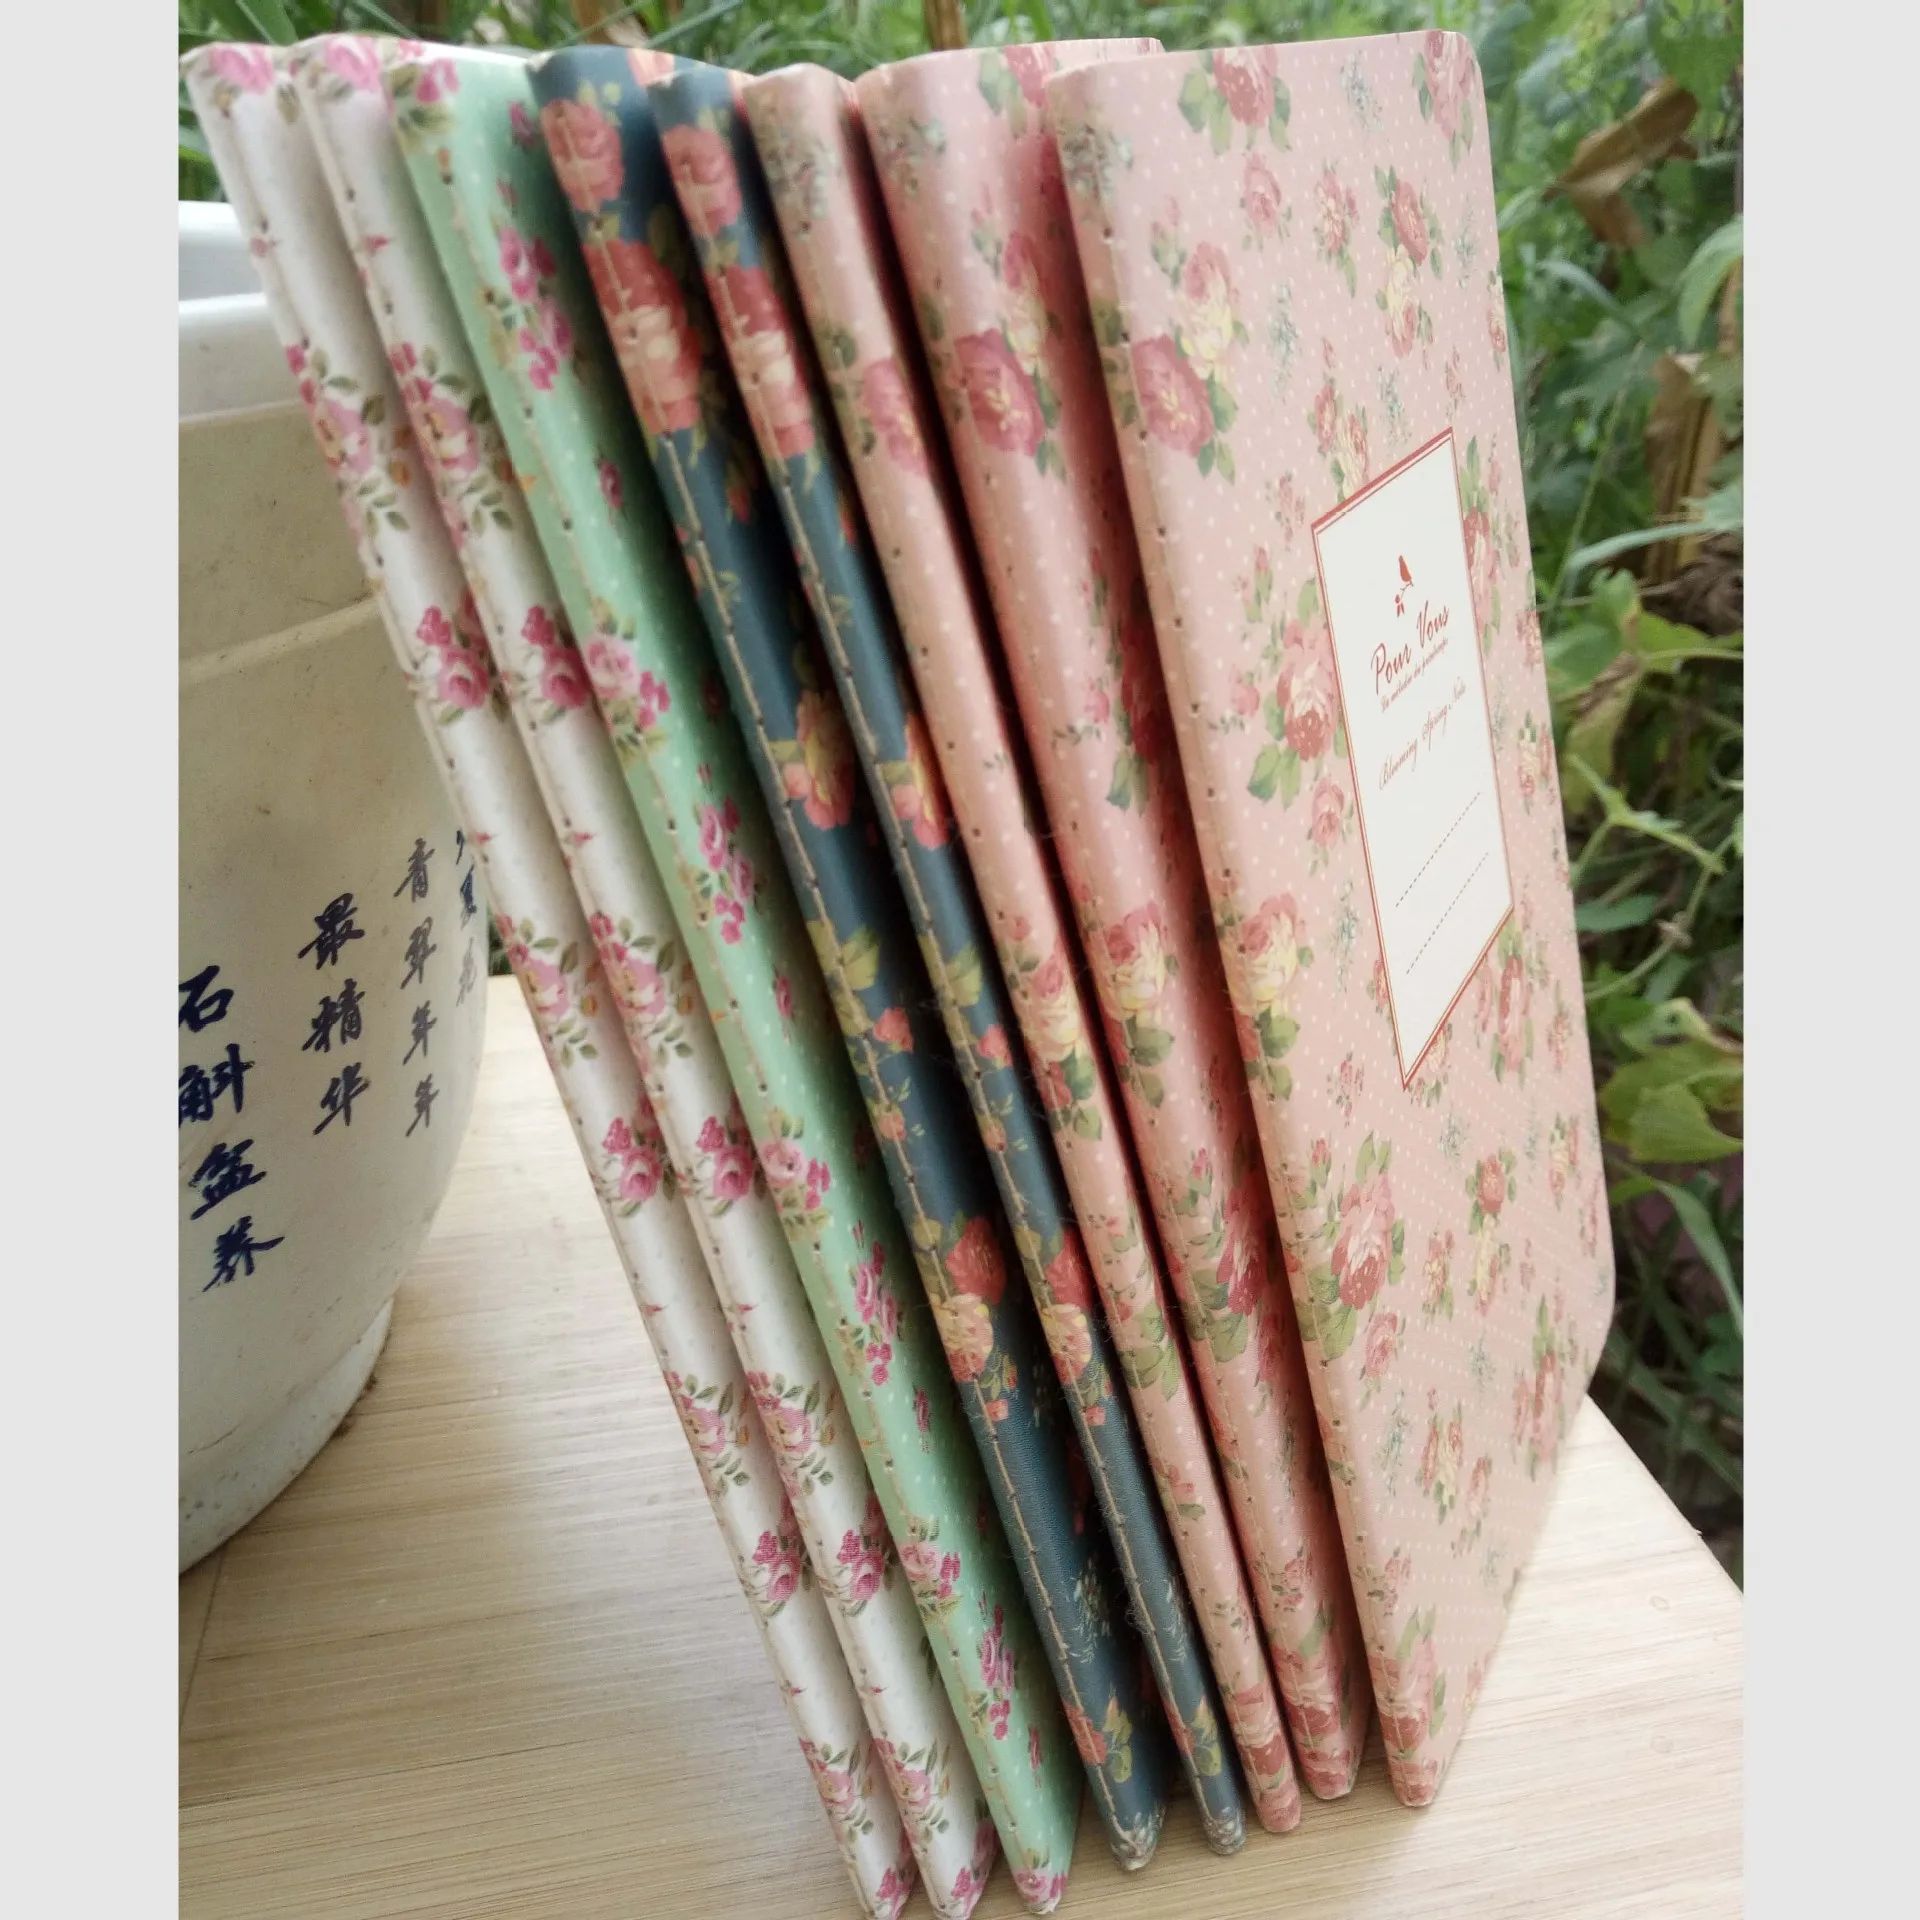 

9x13.7cm Small Flower Cover Notebook Portable 24 Sheets Blank Lined Paper Journal Diary Sketchbook for School Office Stationery